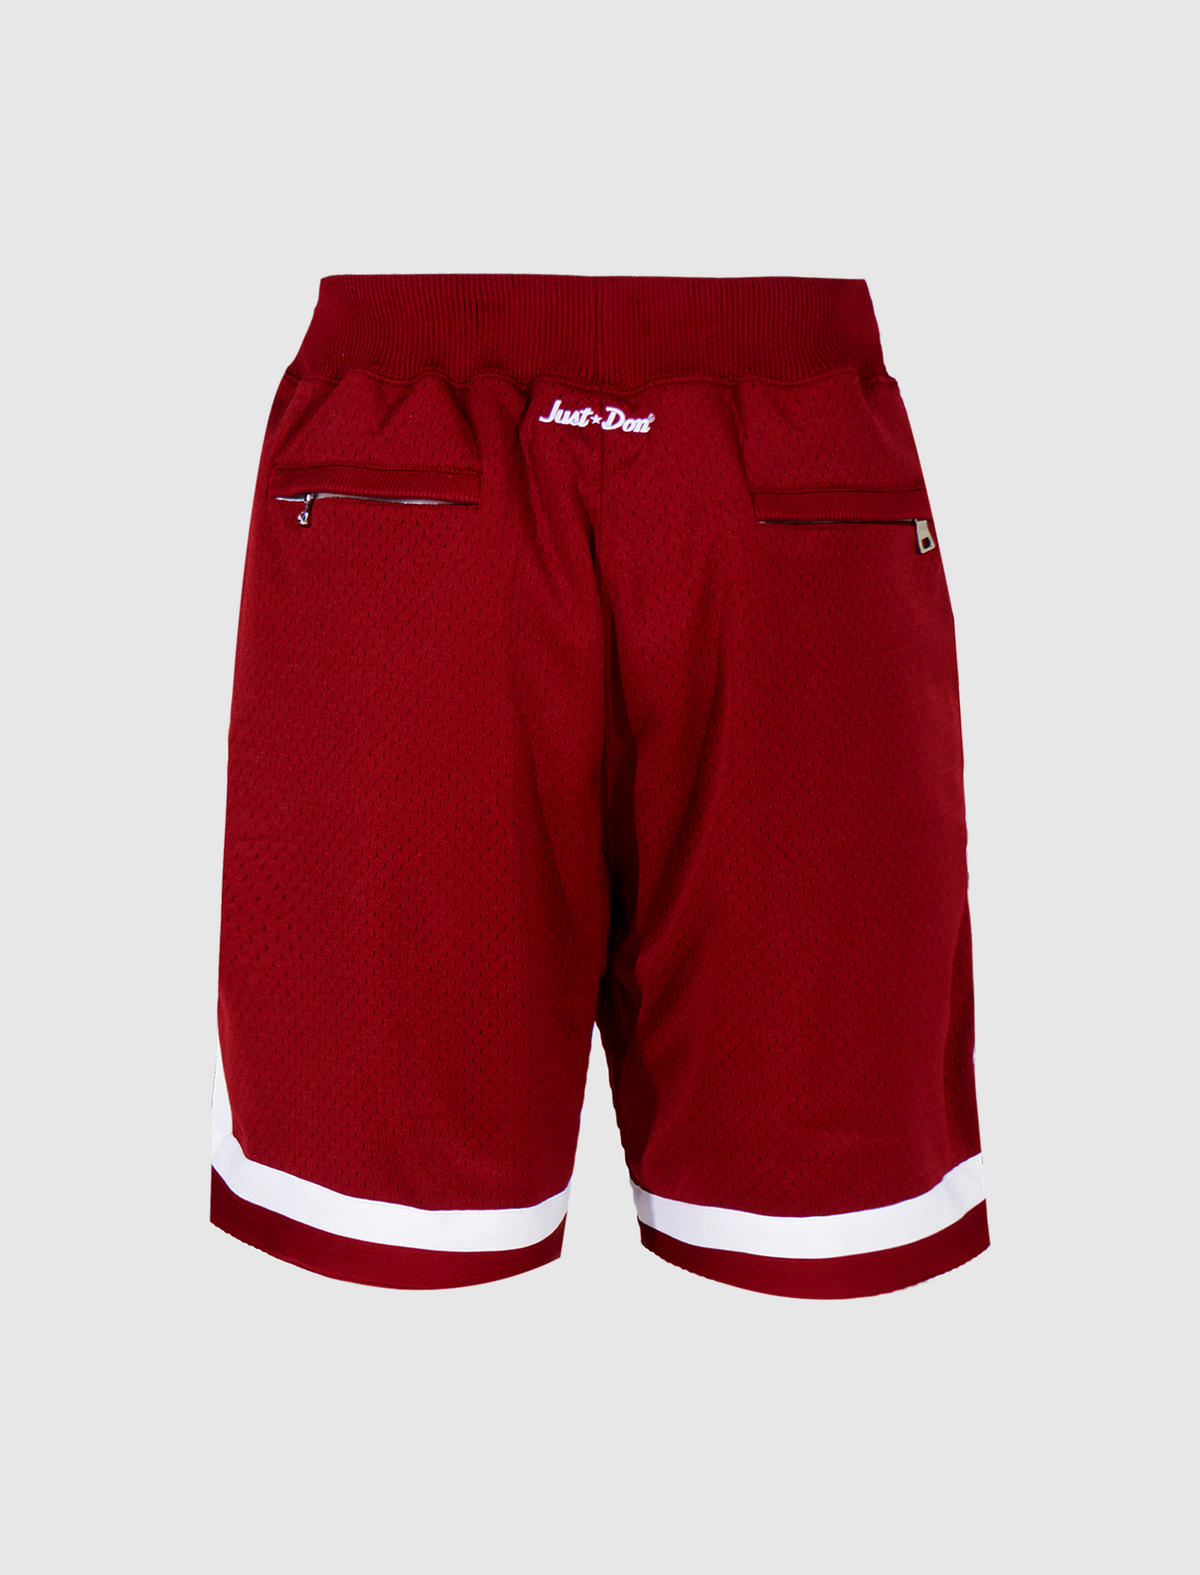 Mitchell & Ness x Just Don Cooperstown Phillies Shorts L